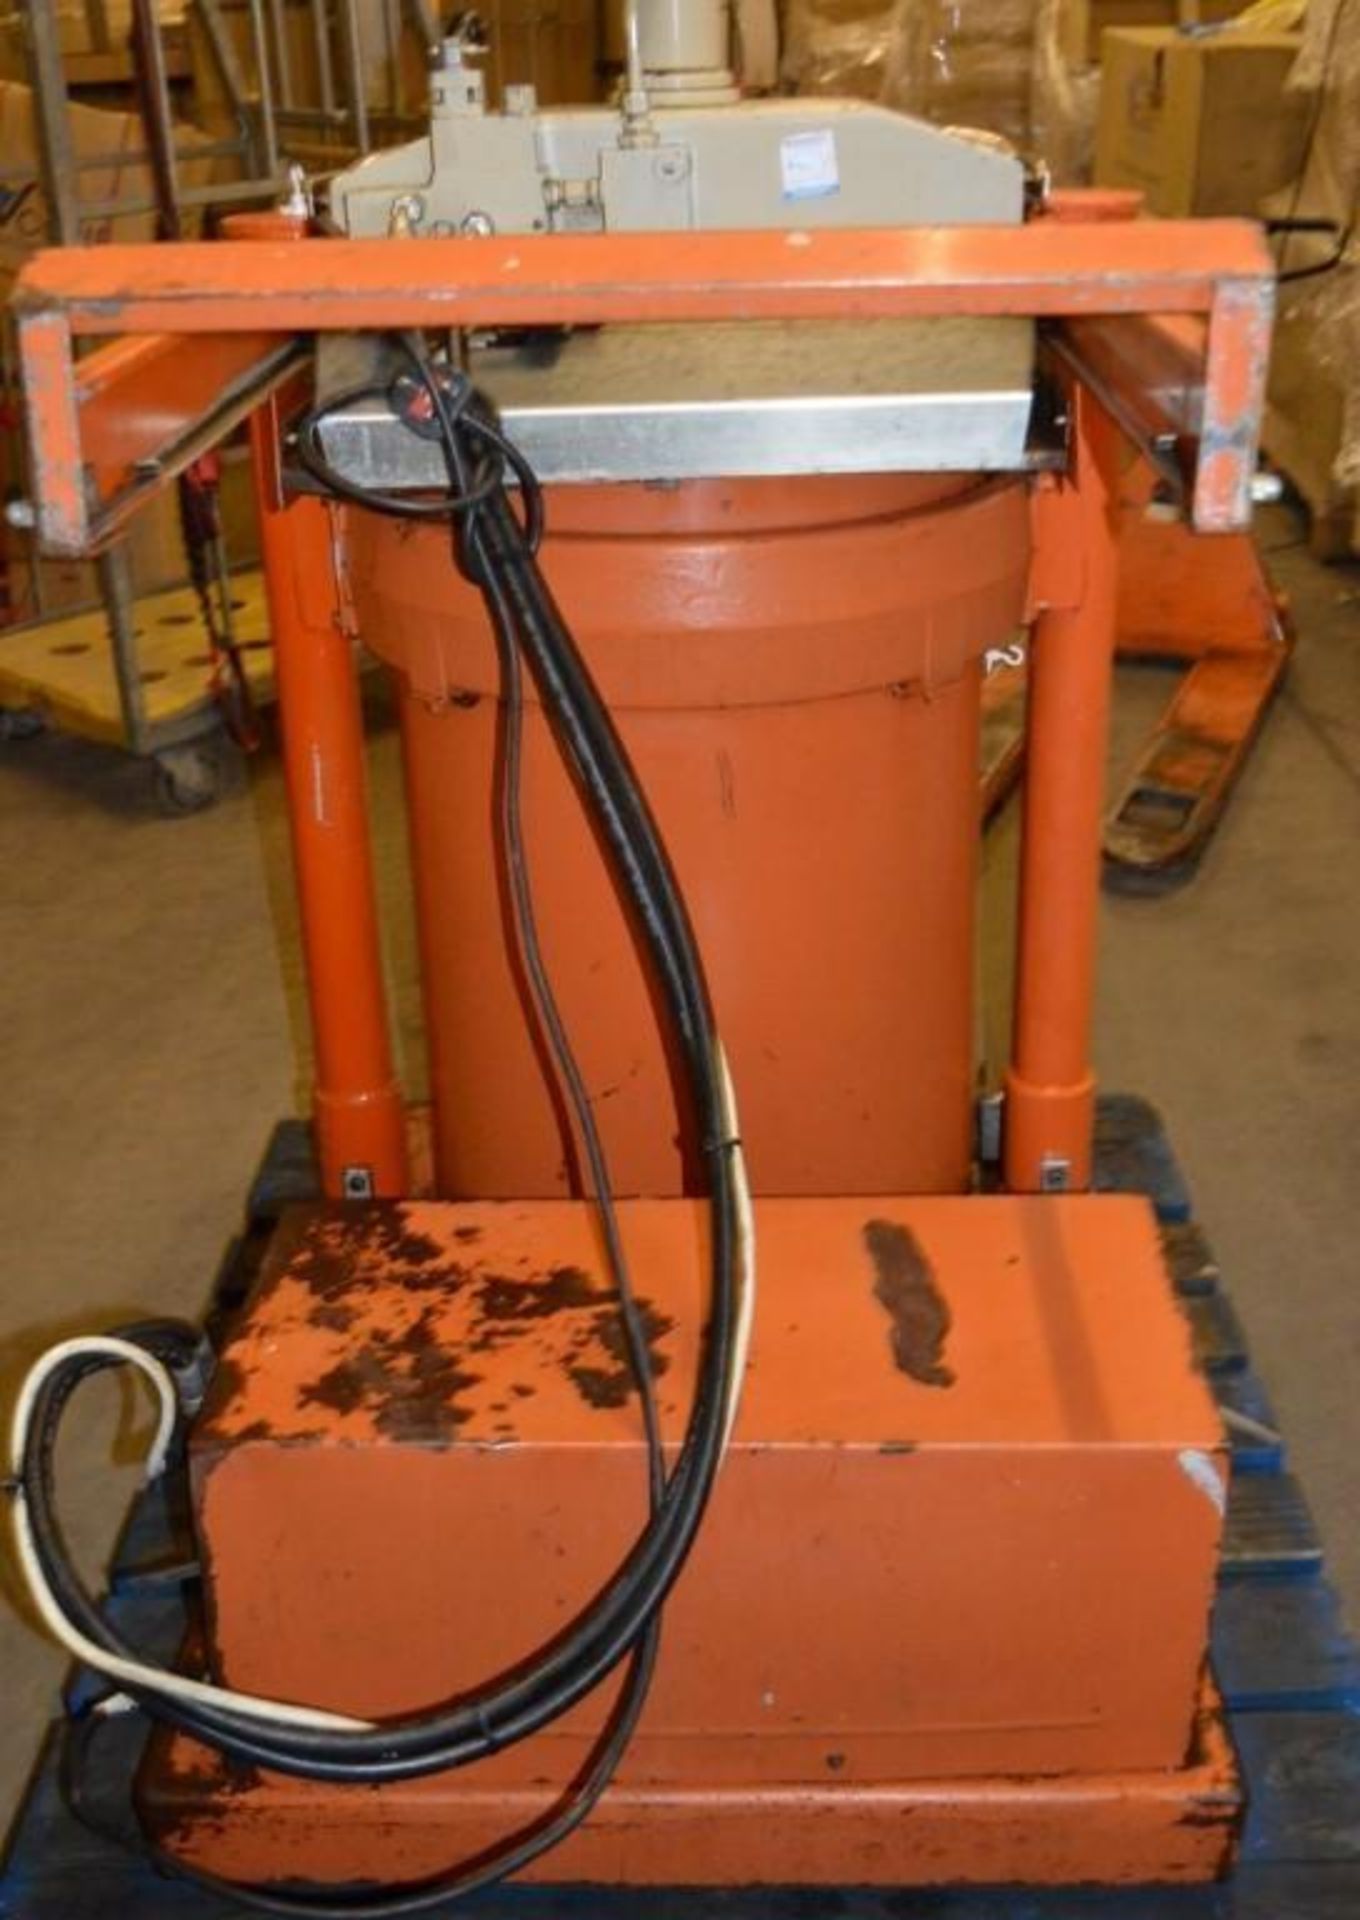 1 x Orwak 5030 Waste Compactor Bailer - Pre-owned For Compacting Recyclable or Non-Recyclable Waste - Image 4 of 4